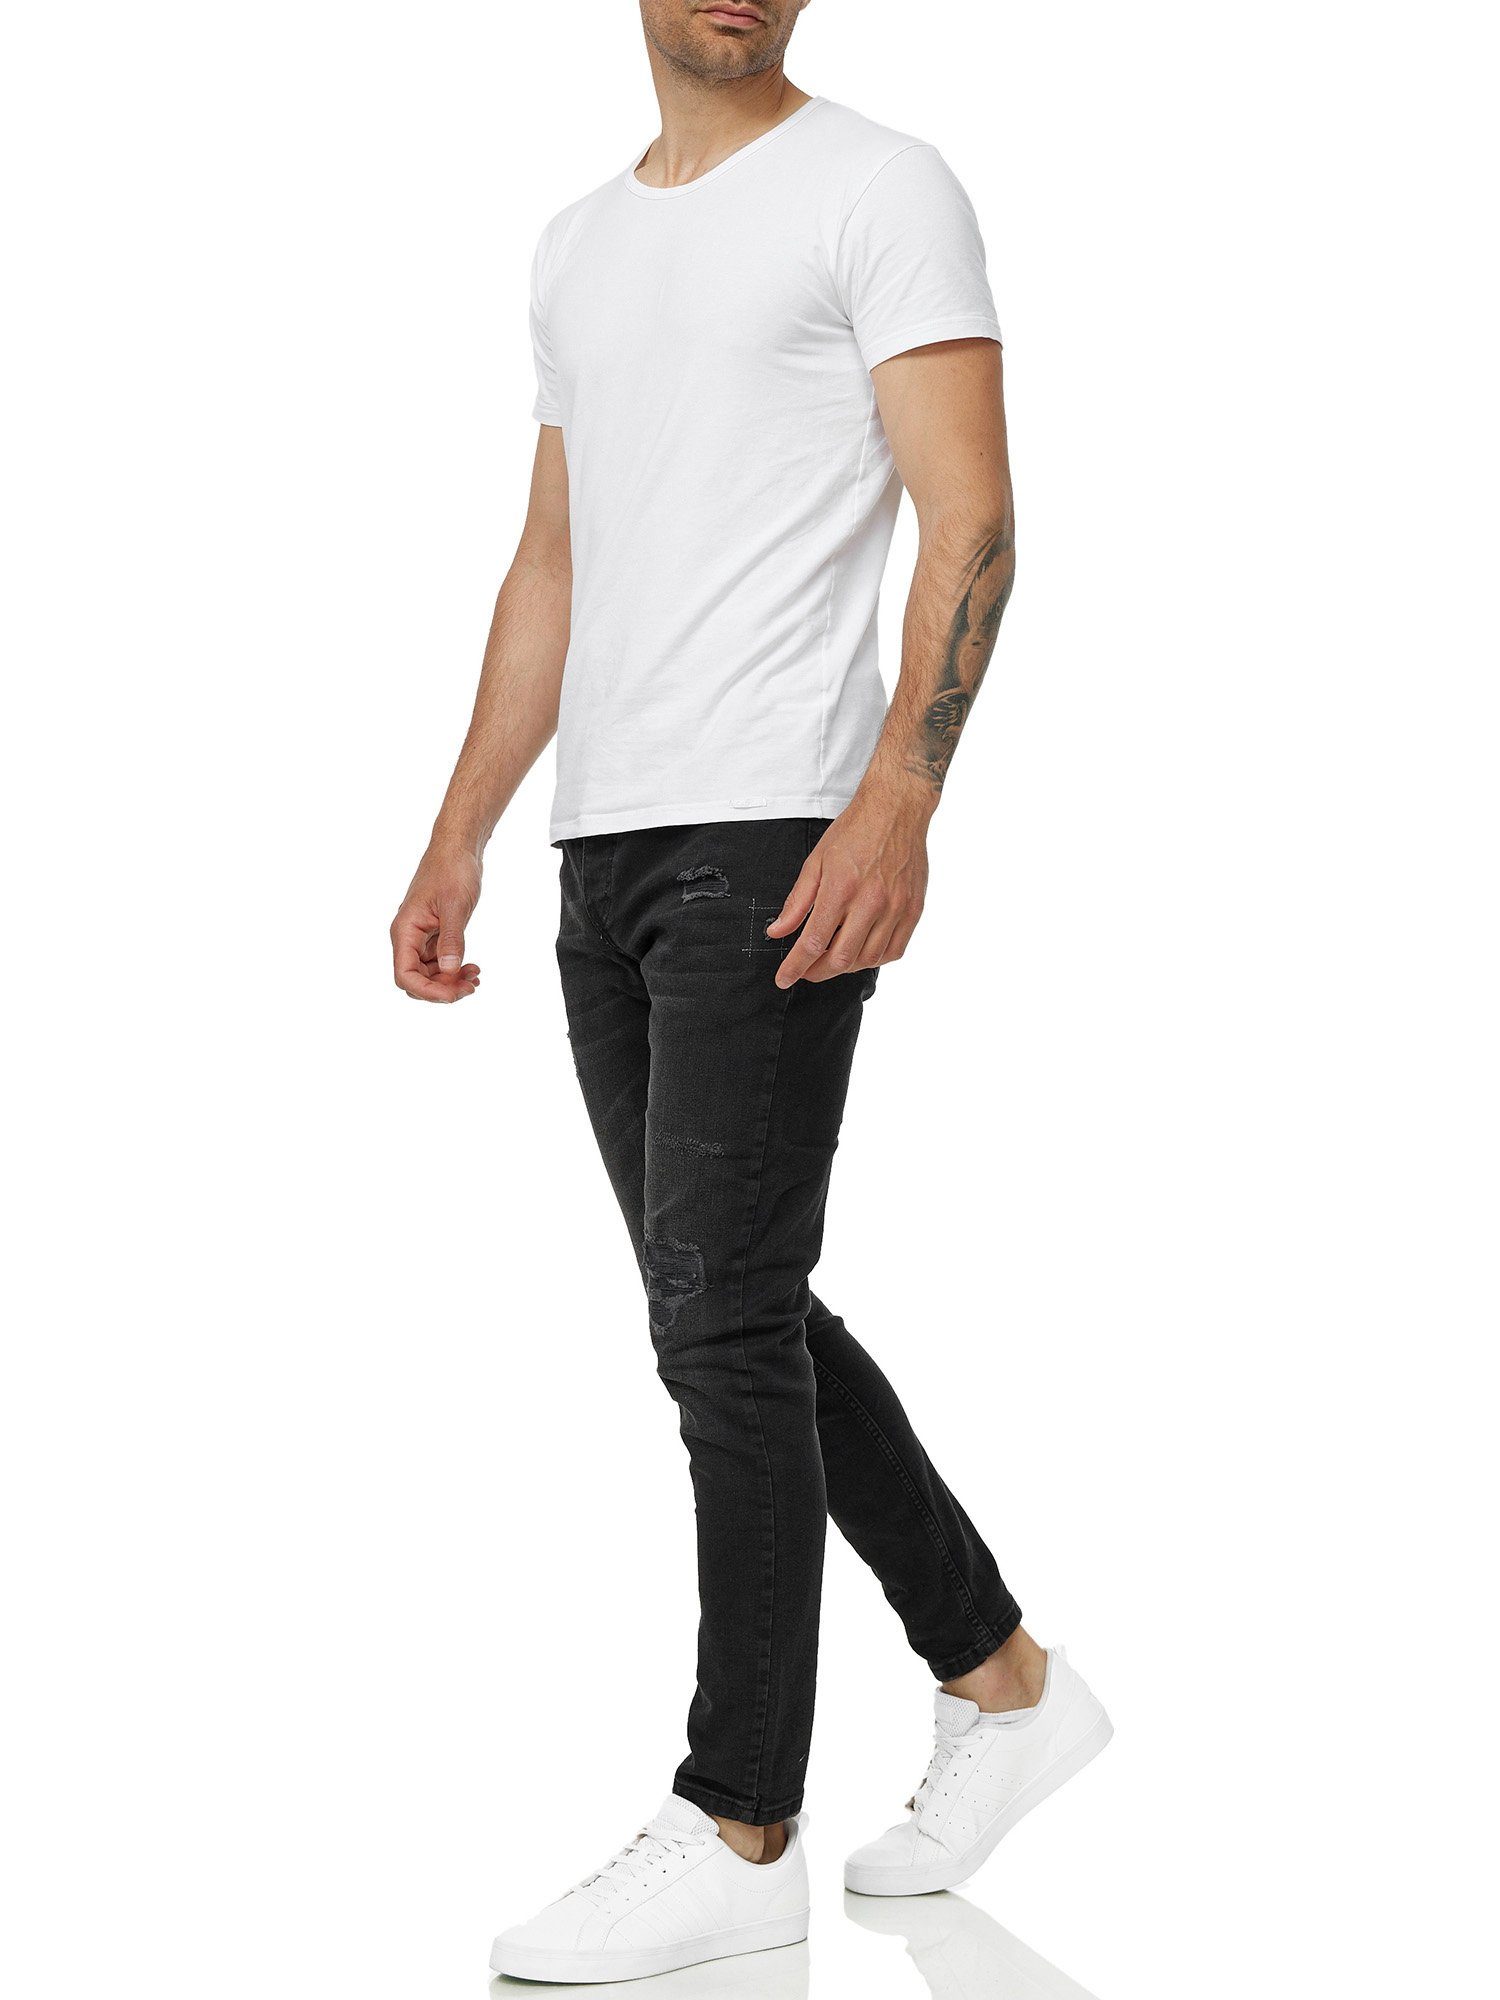 Stretch & im Tazzio mit Destroyed-Look Skinny-fit-Jeans A107 Elasthan